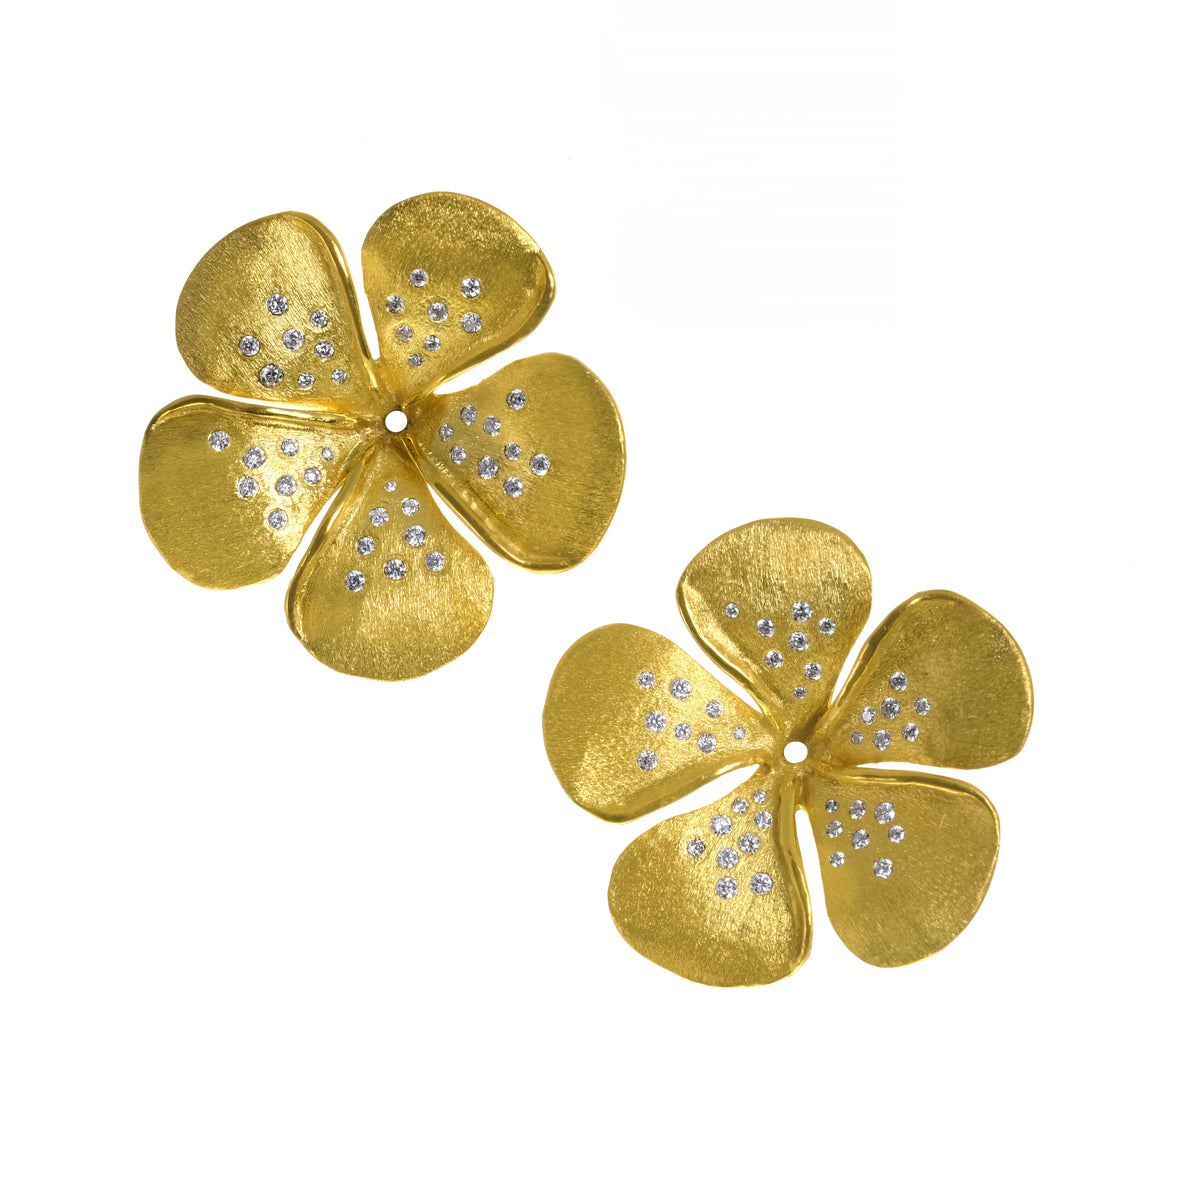 Diamond Speckled Kalachuchi Earring Jacket, Medium, Satin Finish (available in yellow, white, and rose gold)